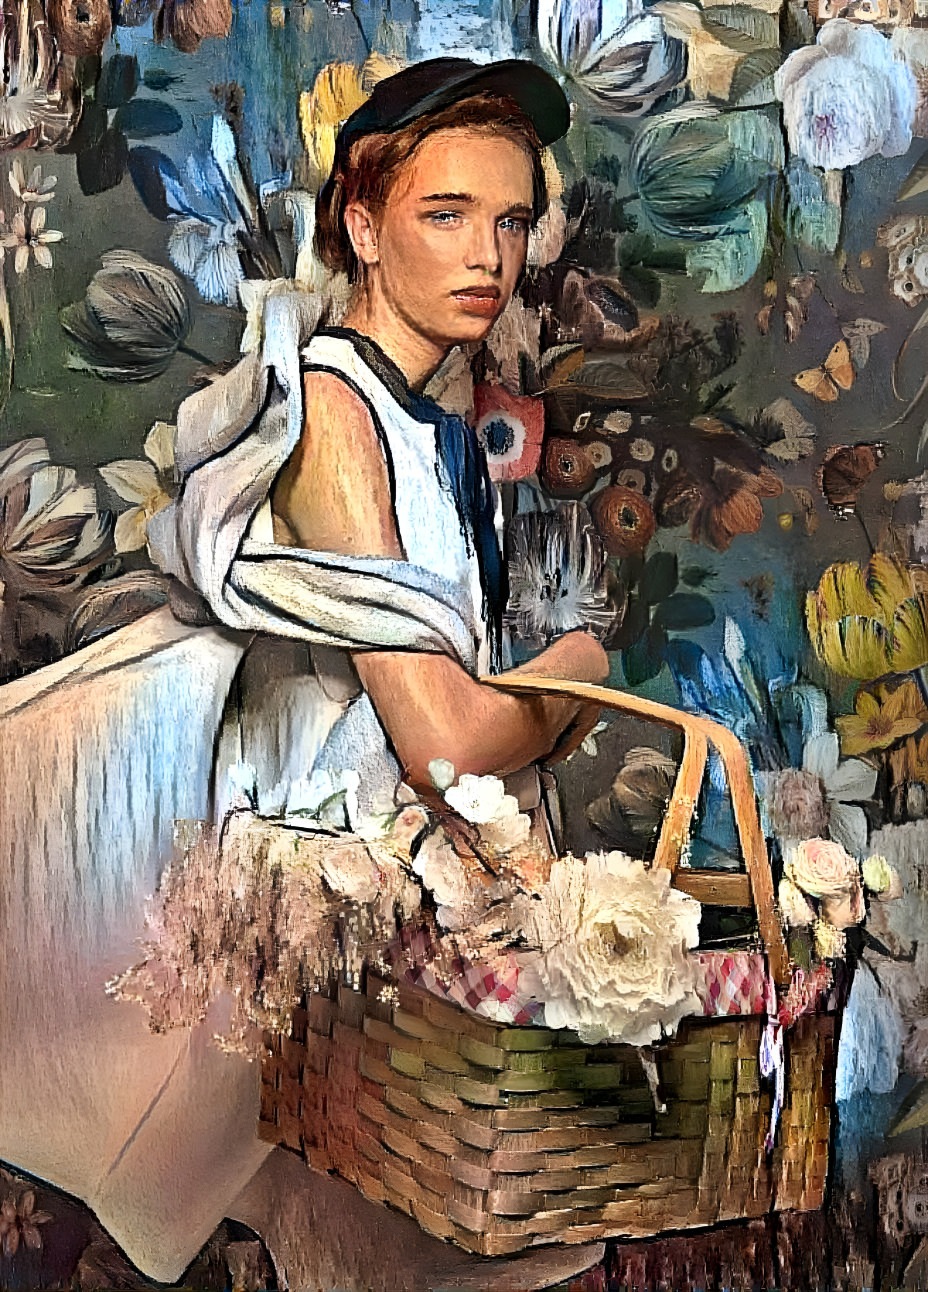 Lady in white